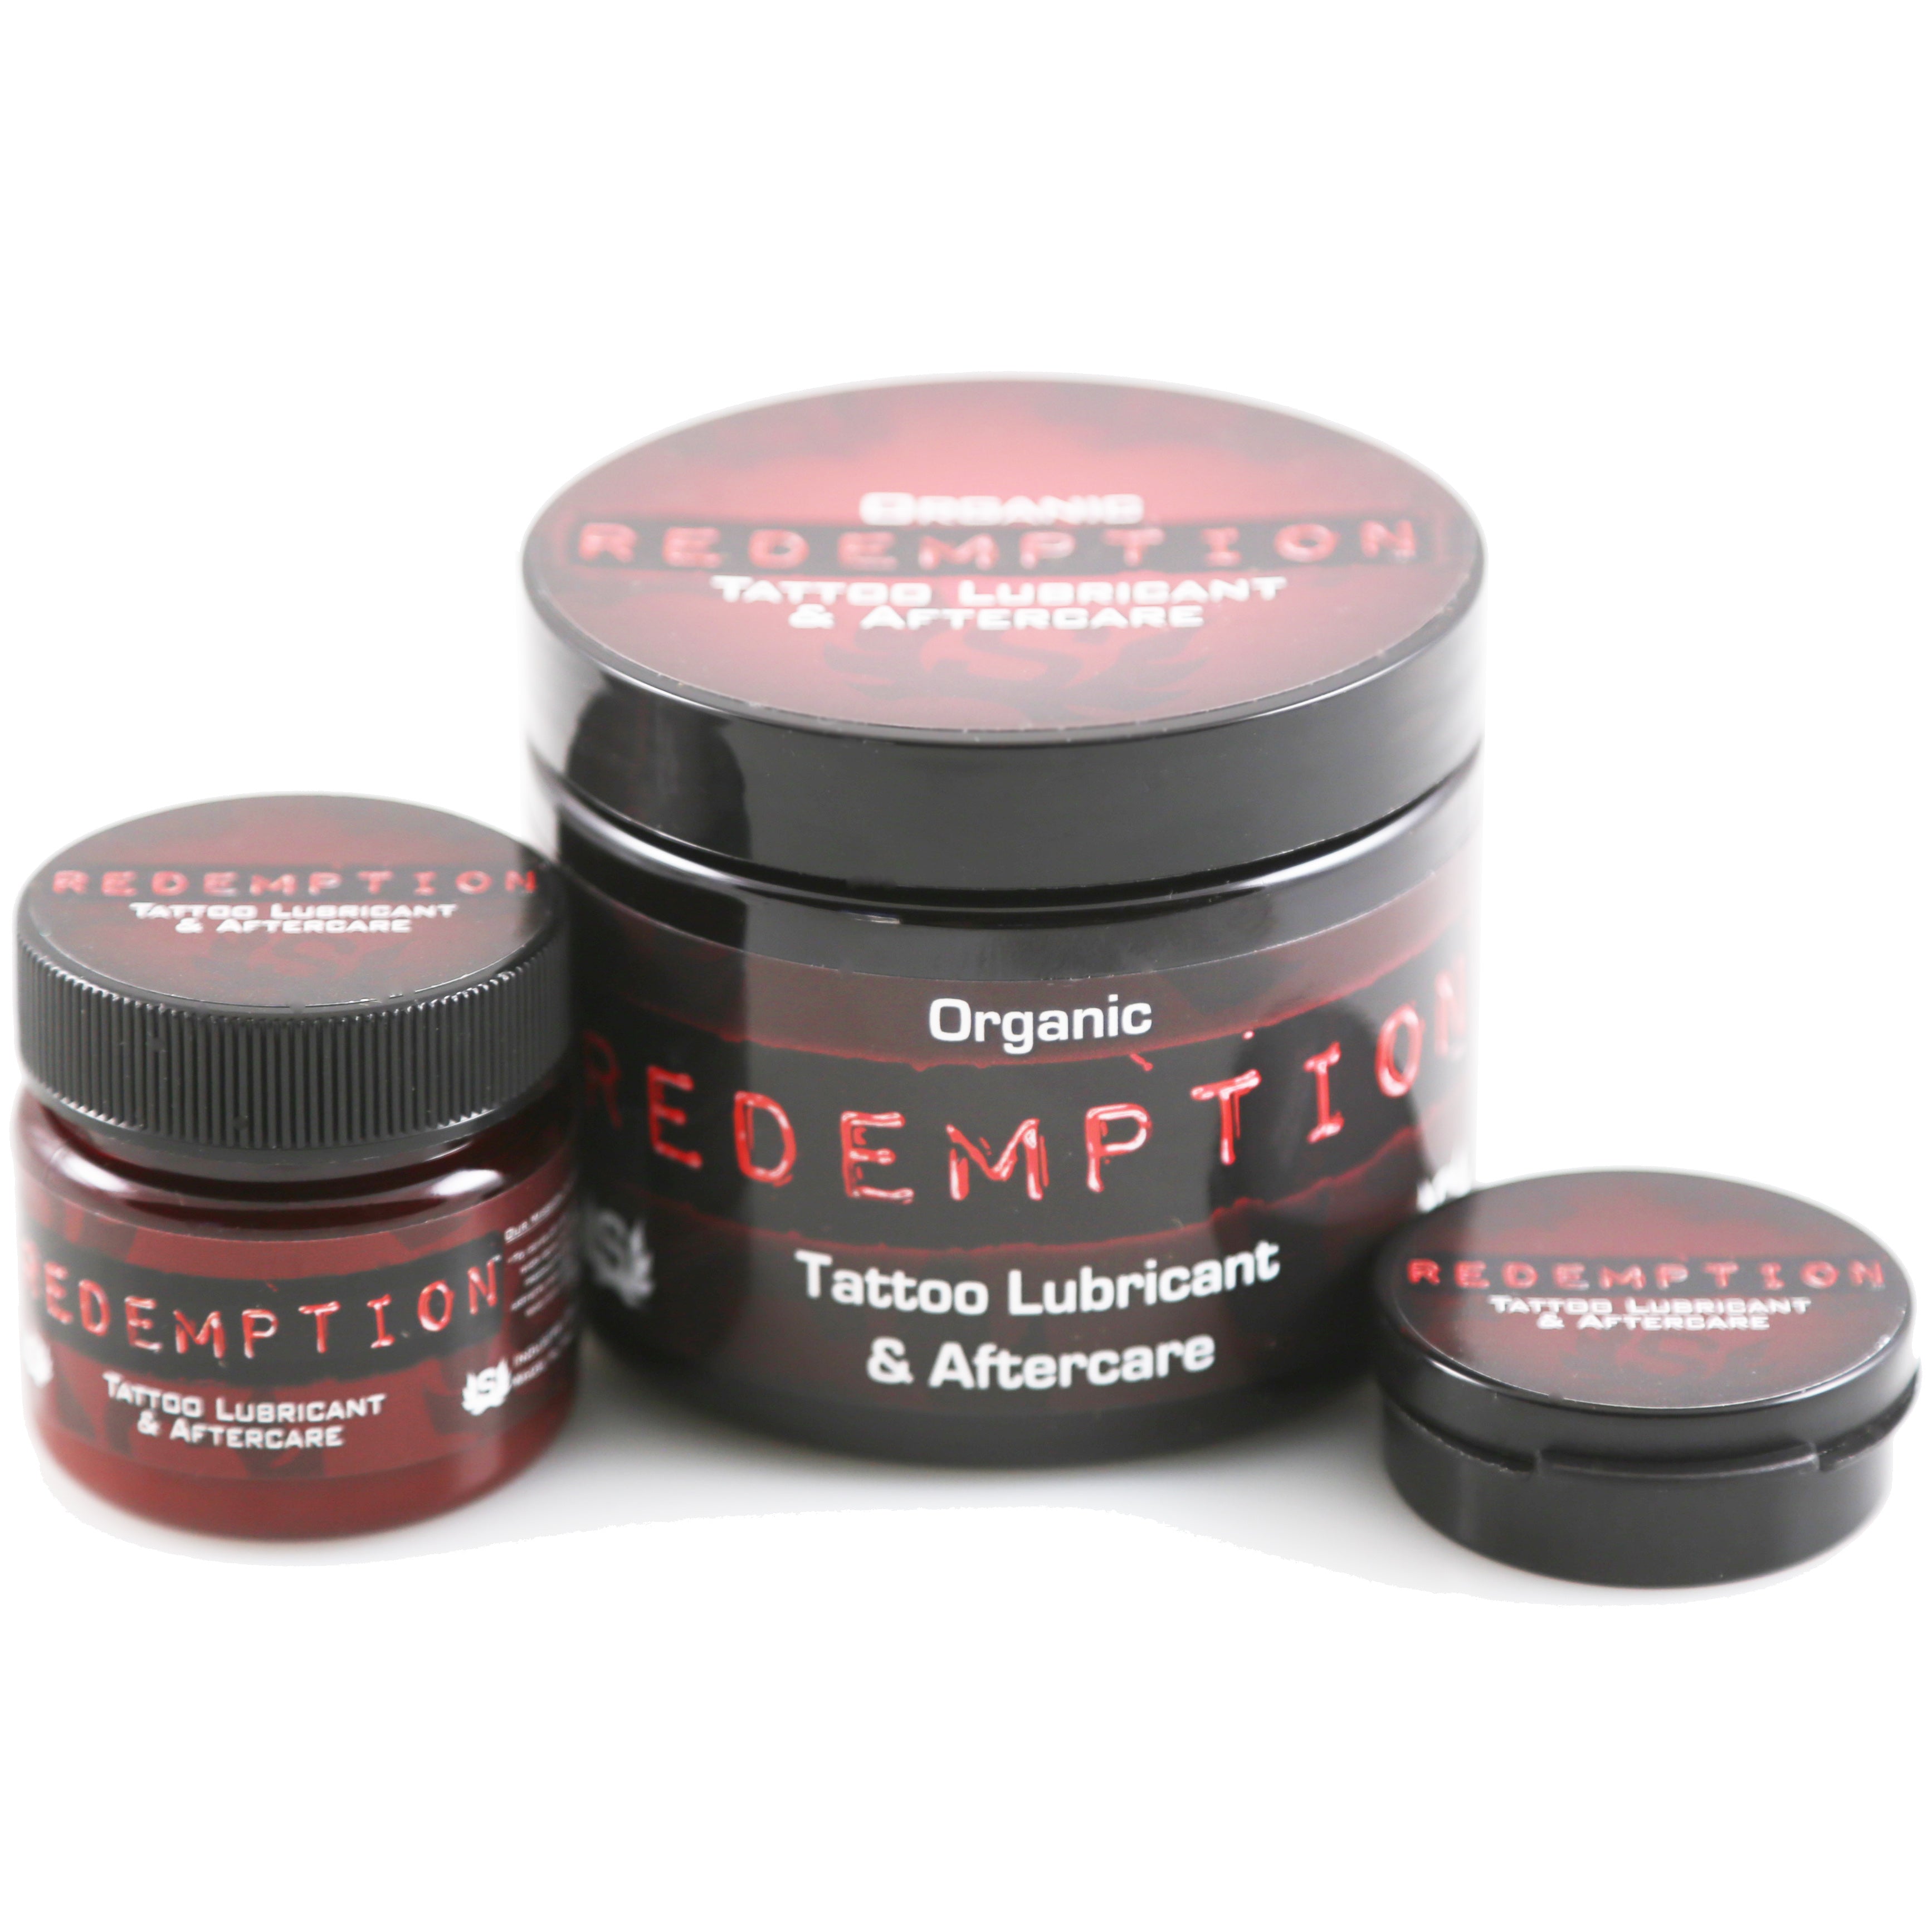 Redemption Organic Tattoo Lubricant & Aftercare